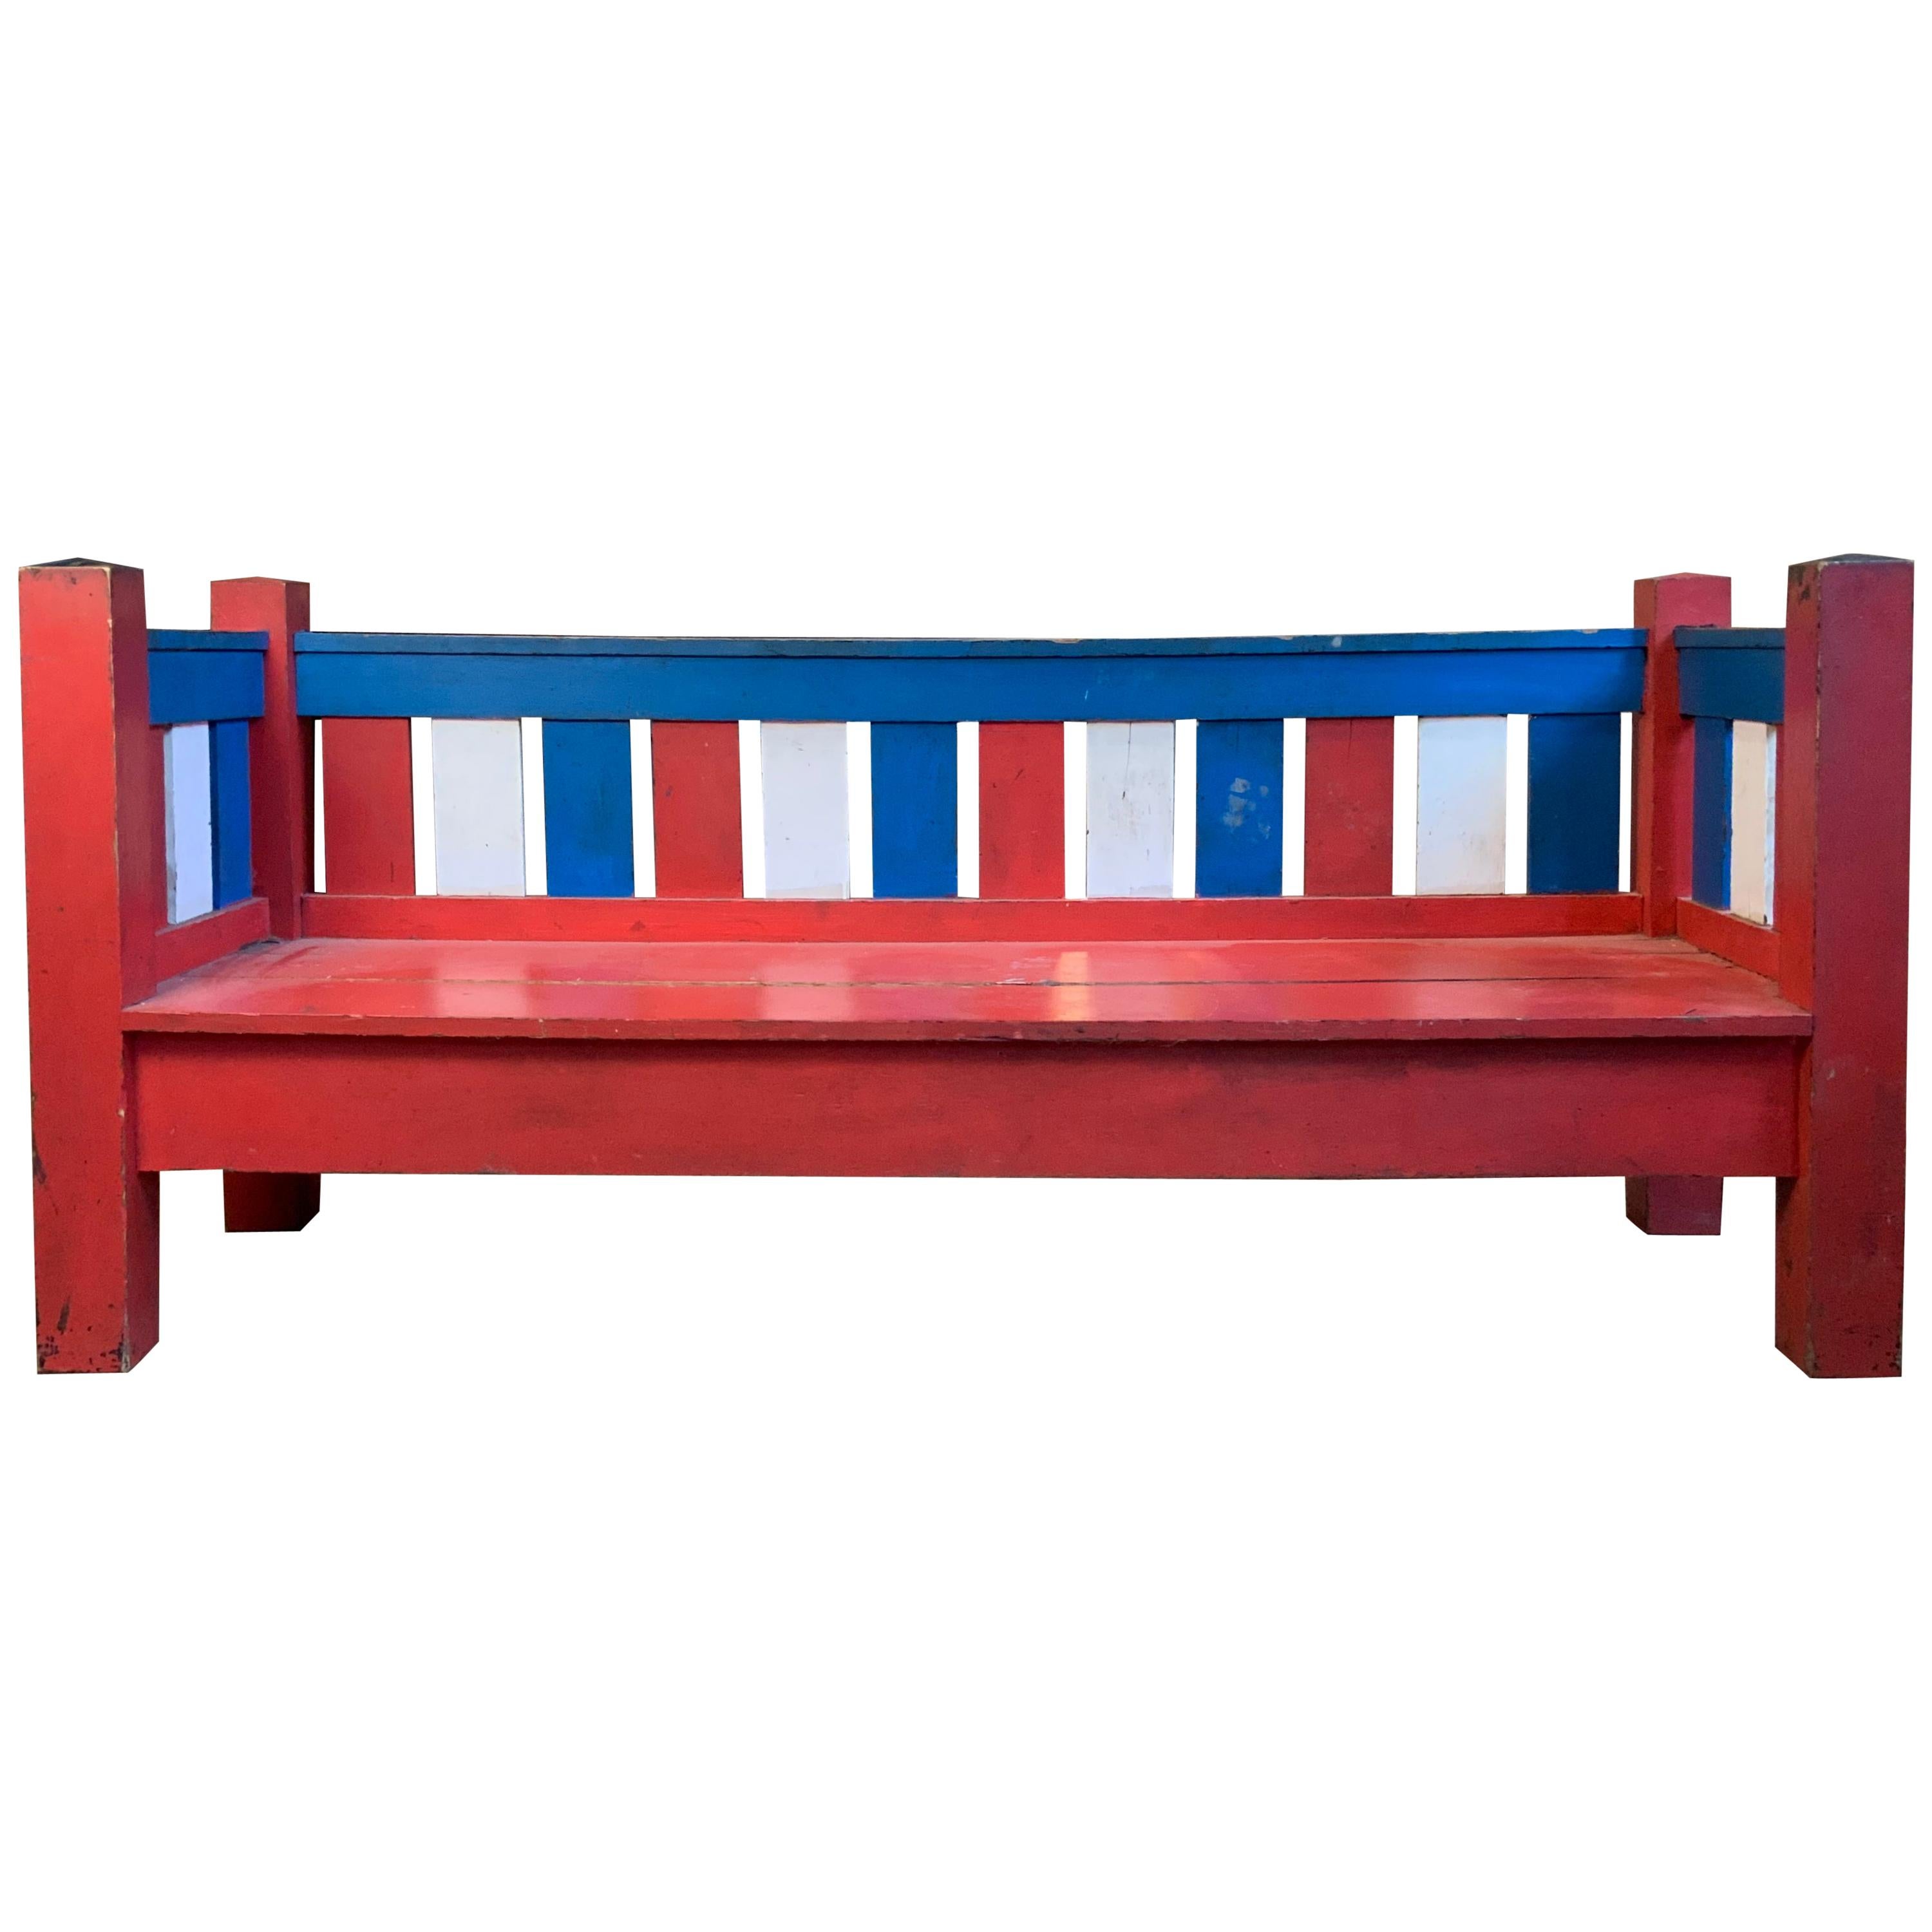 Antique 1940s Patriotic Settee in Red, White and Blue